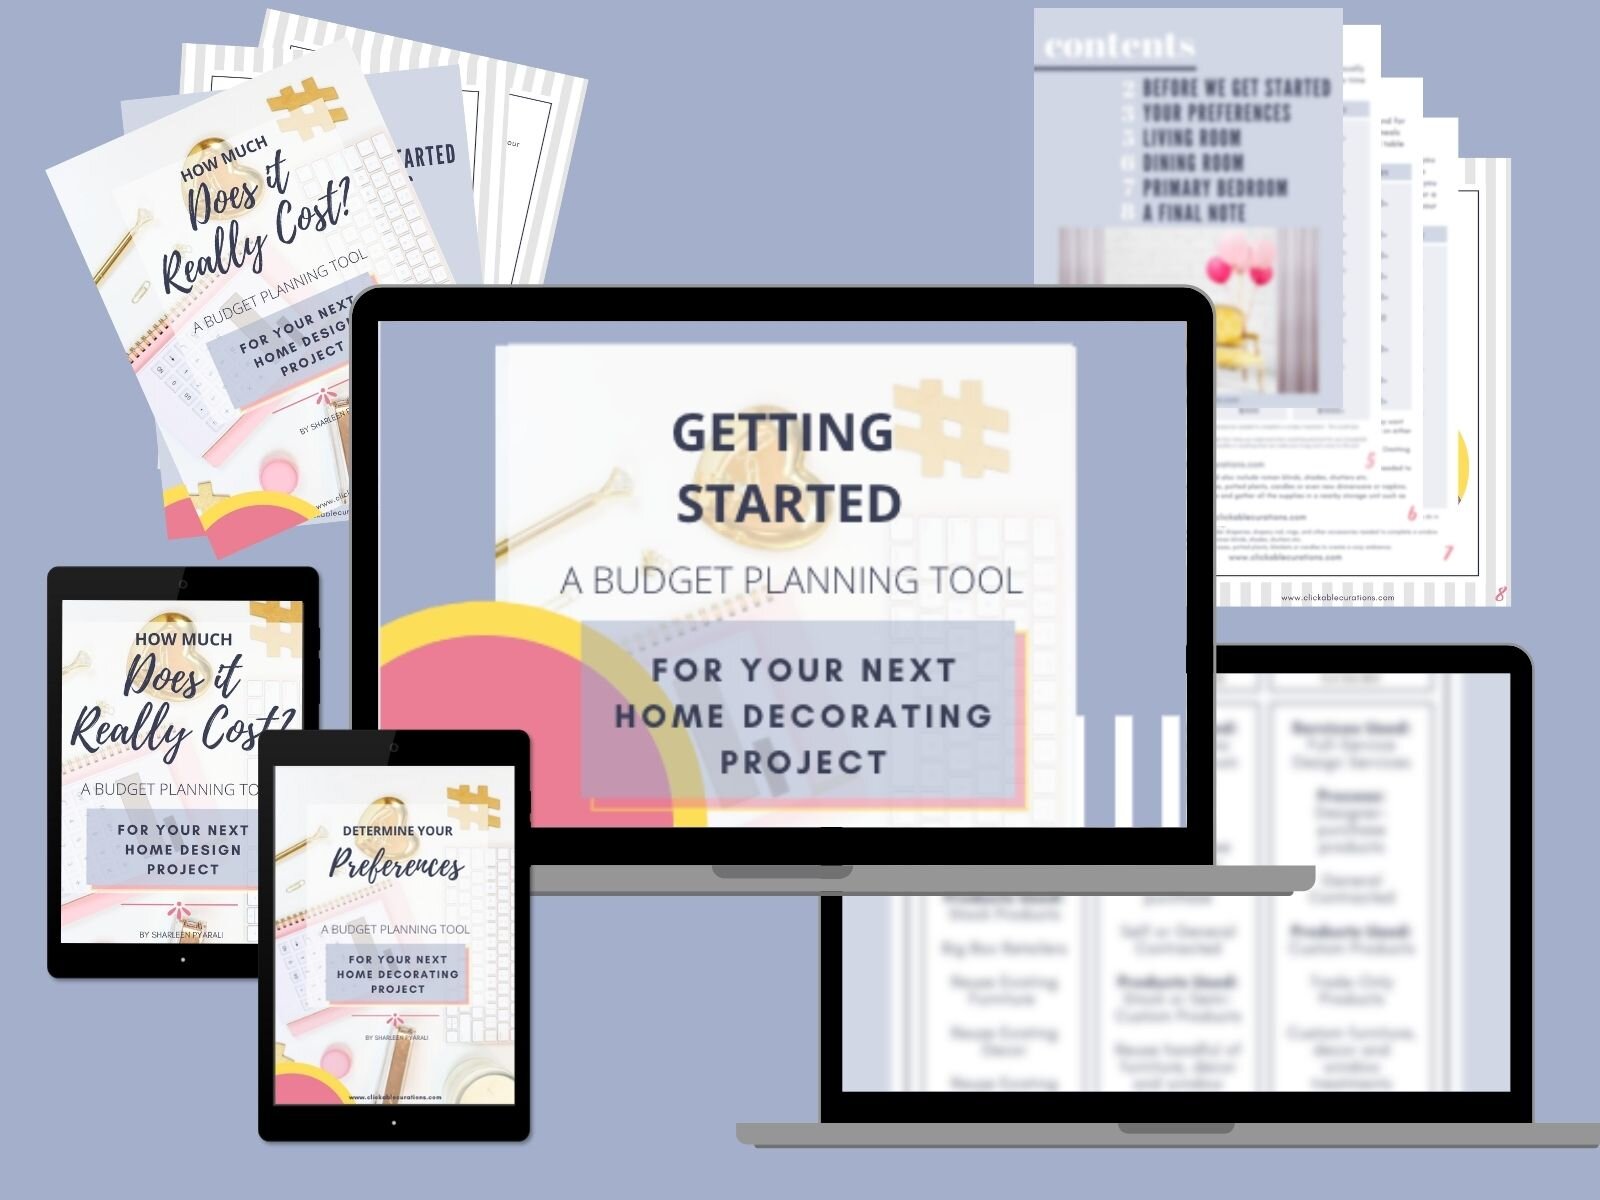 Home Decorating Budget Planning Tool- How Much Does it Really Cost ...